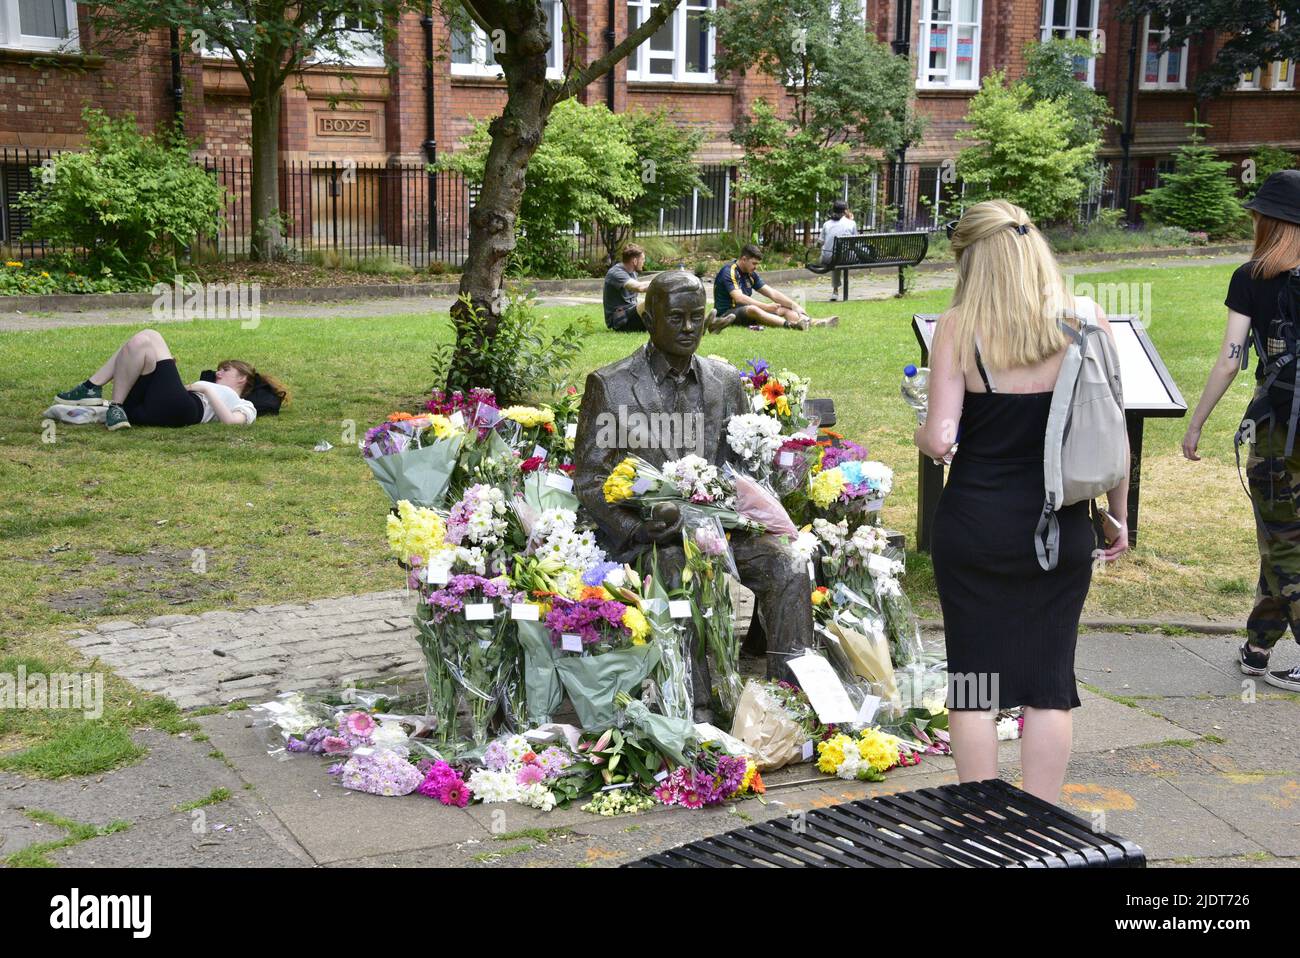 Manchester, UK. 23rd June, 2022. Bunches of flowers left at the Alan Turing statue to celebrate Turing's birthday on 23rd June at Sackville Gardens, central Manchester, England, UK. Turing  is considered to be the father of theoretical computer science and artificial intelligence, played a major role in the development of early computers at the University of Manchester and was a renowned World War II codebreaker. The charity 'eQuality Time' takes the lead in leaving flowers on this date. Credit: Terry Waller/Alamy Live News Stock Photo